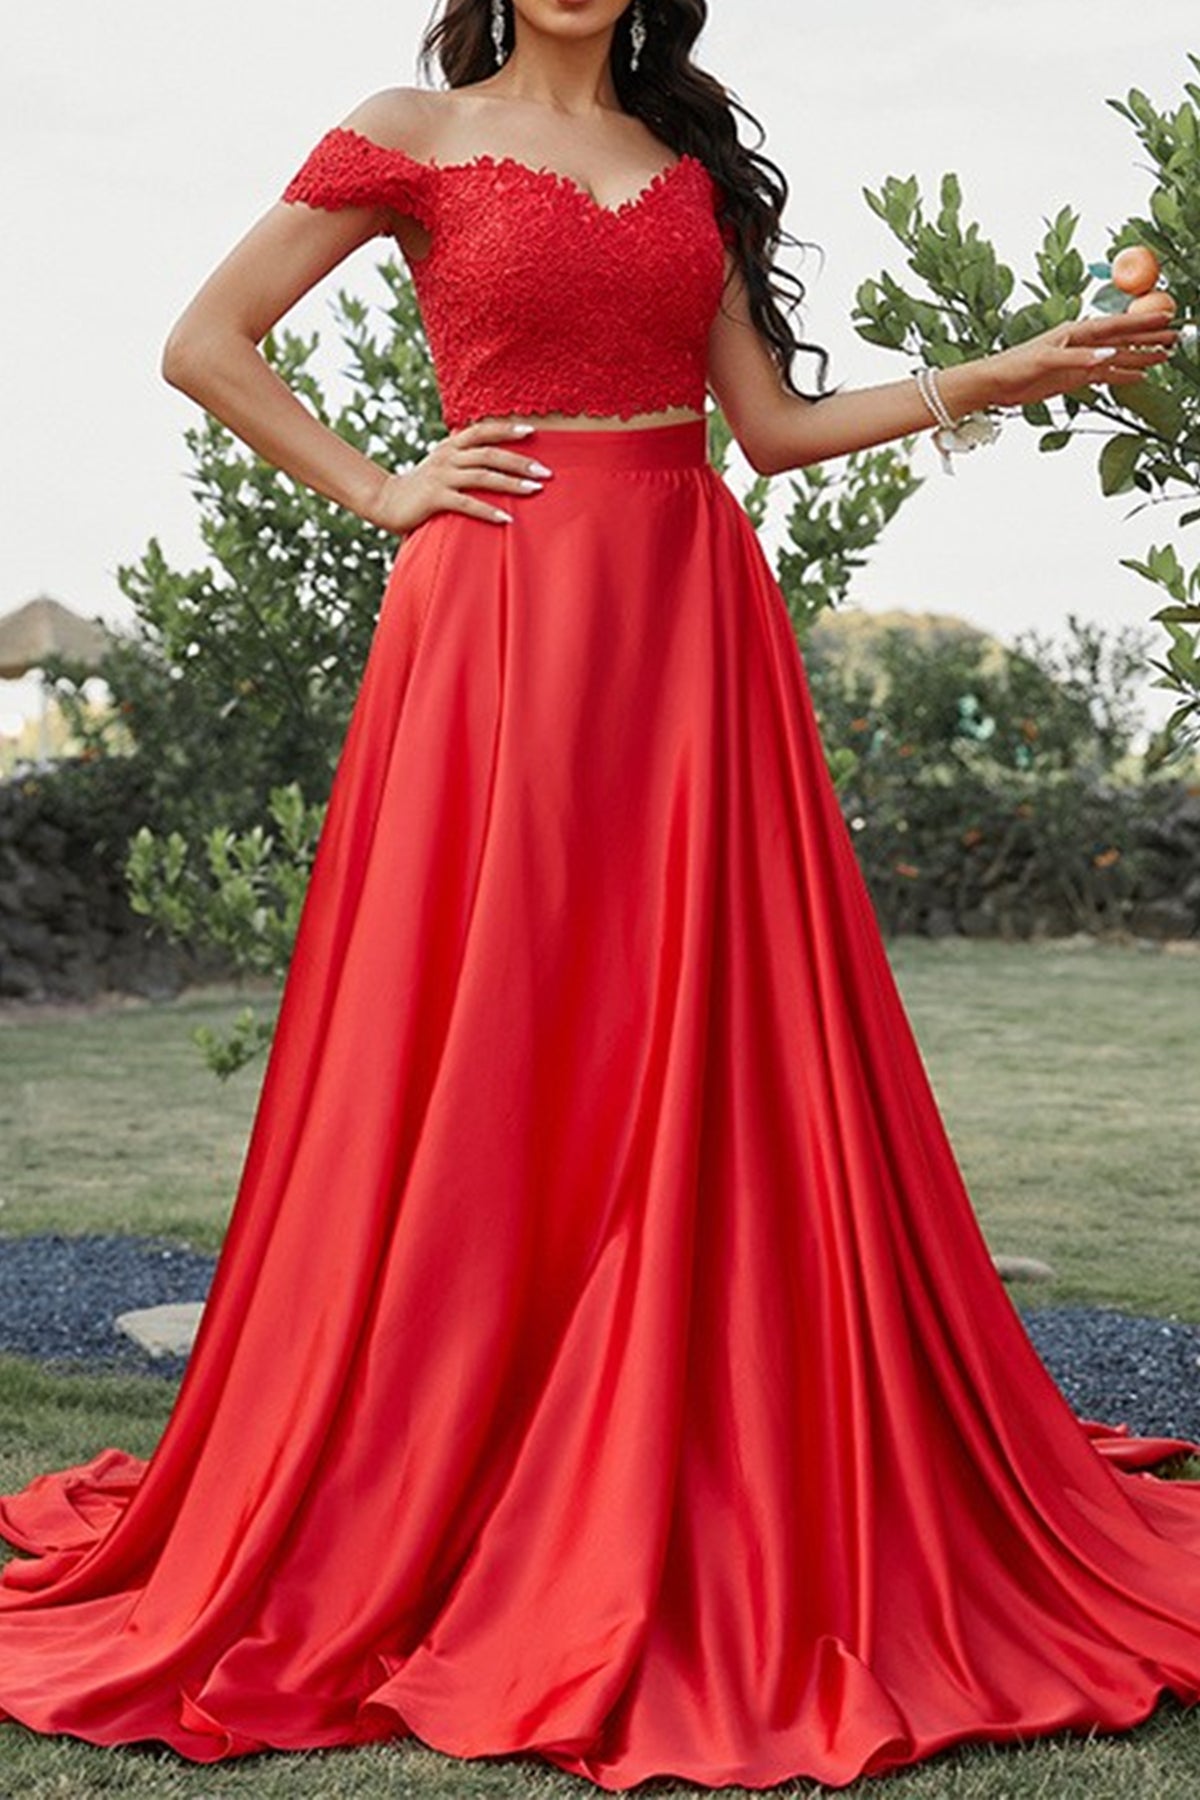 Red Off Shoulder Lace Applique Party Ball Gown (36201302) - eDressit